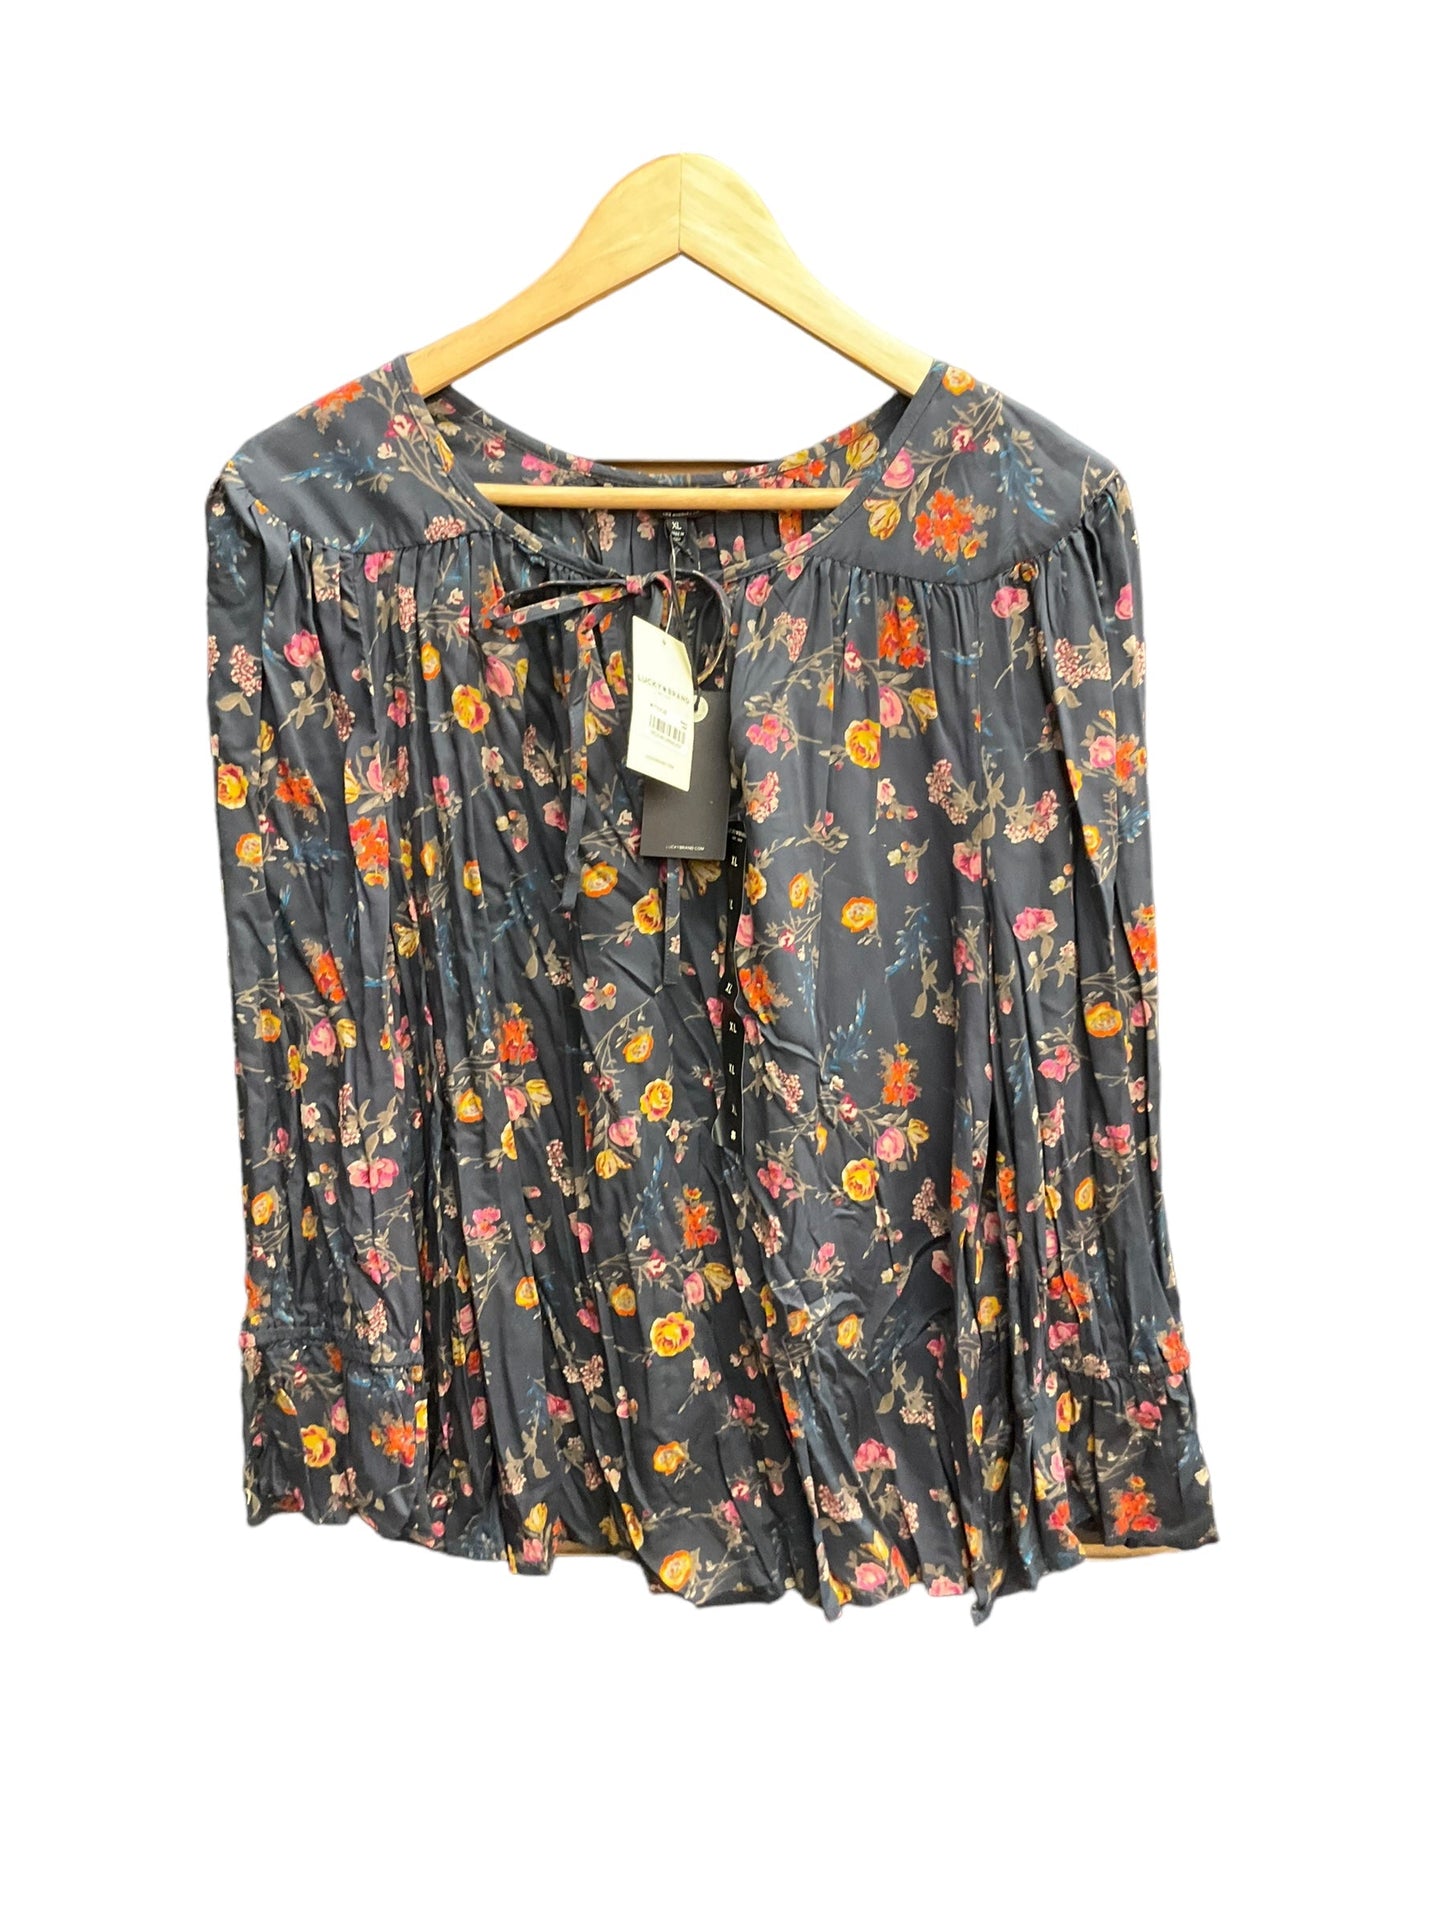 Floral Print Top Long Sleeve Lucky Brand, Size Xl